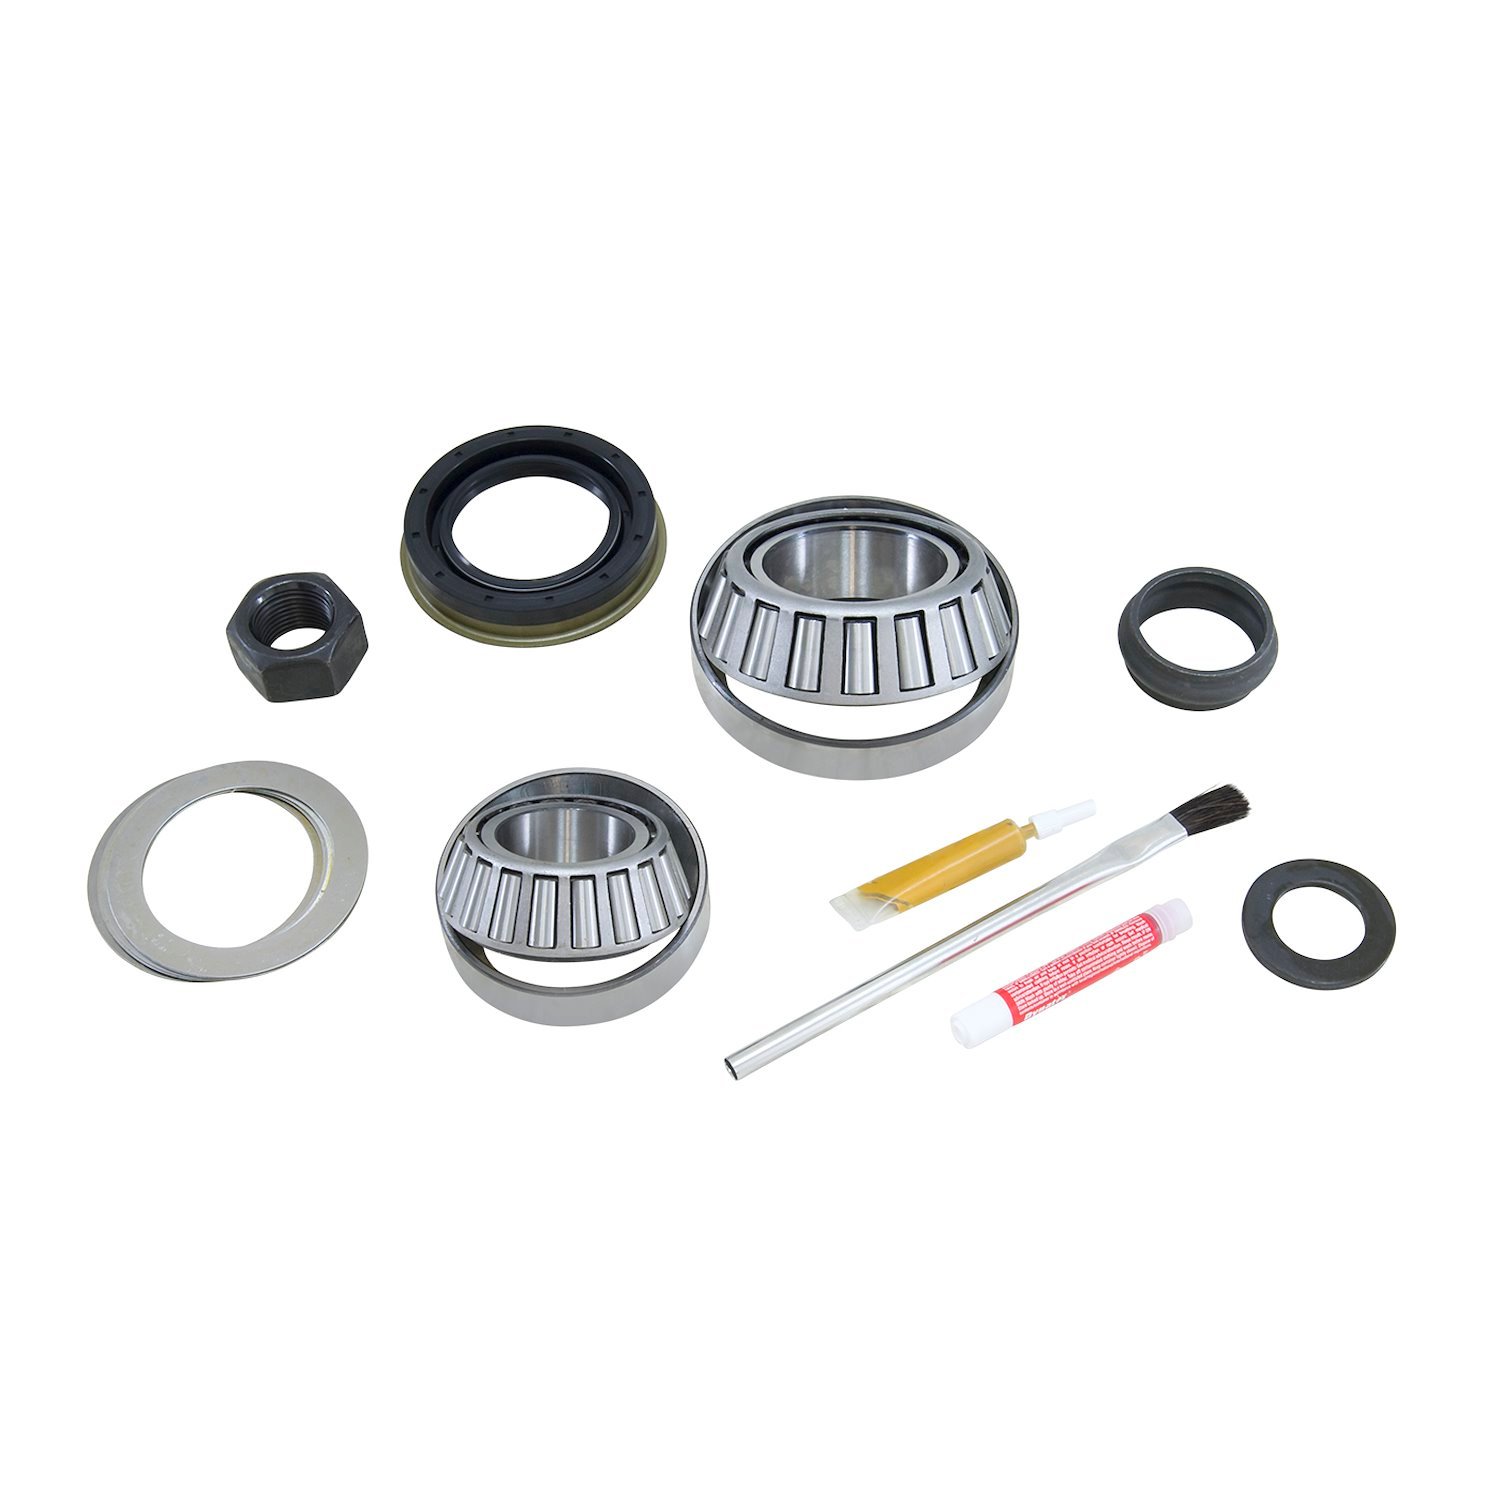 Pinion Install Kit For Dana 44 Ica Differential For Corvette